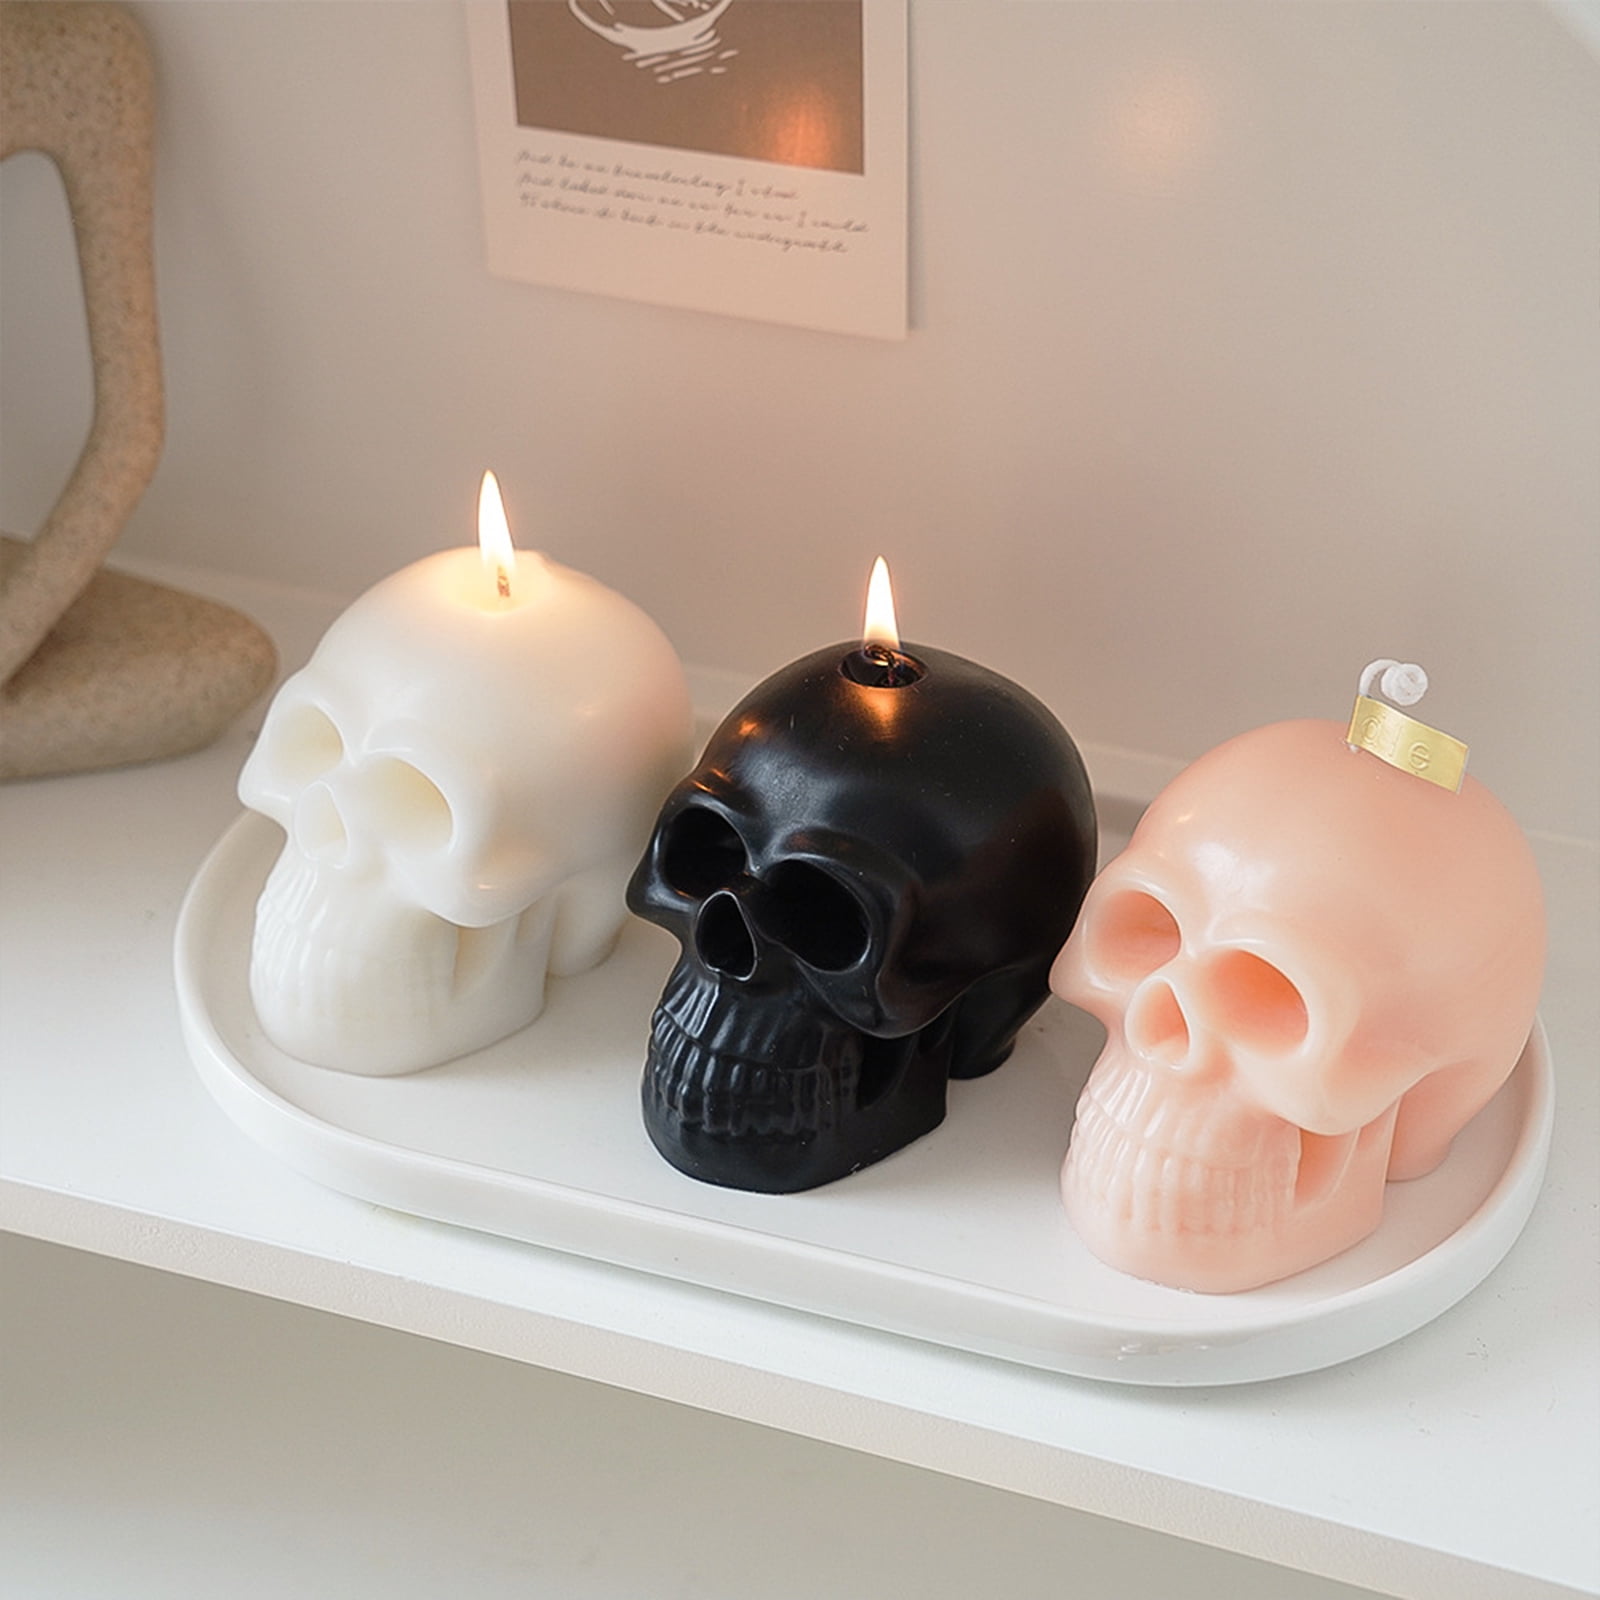 Home decor & candles lover – All4candle